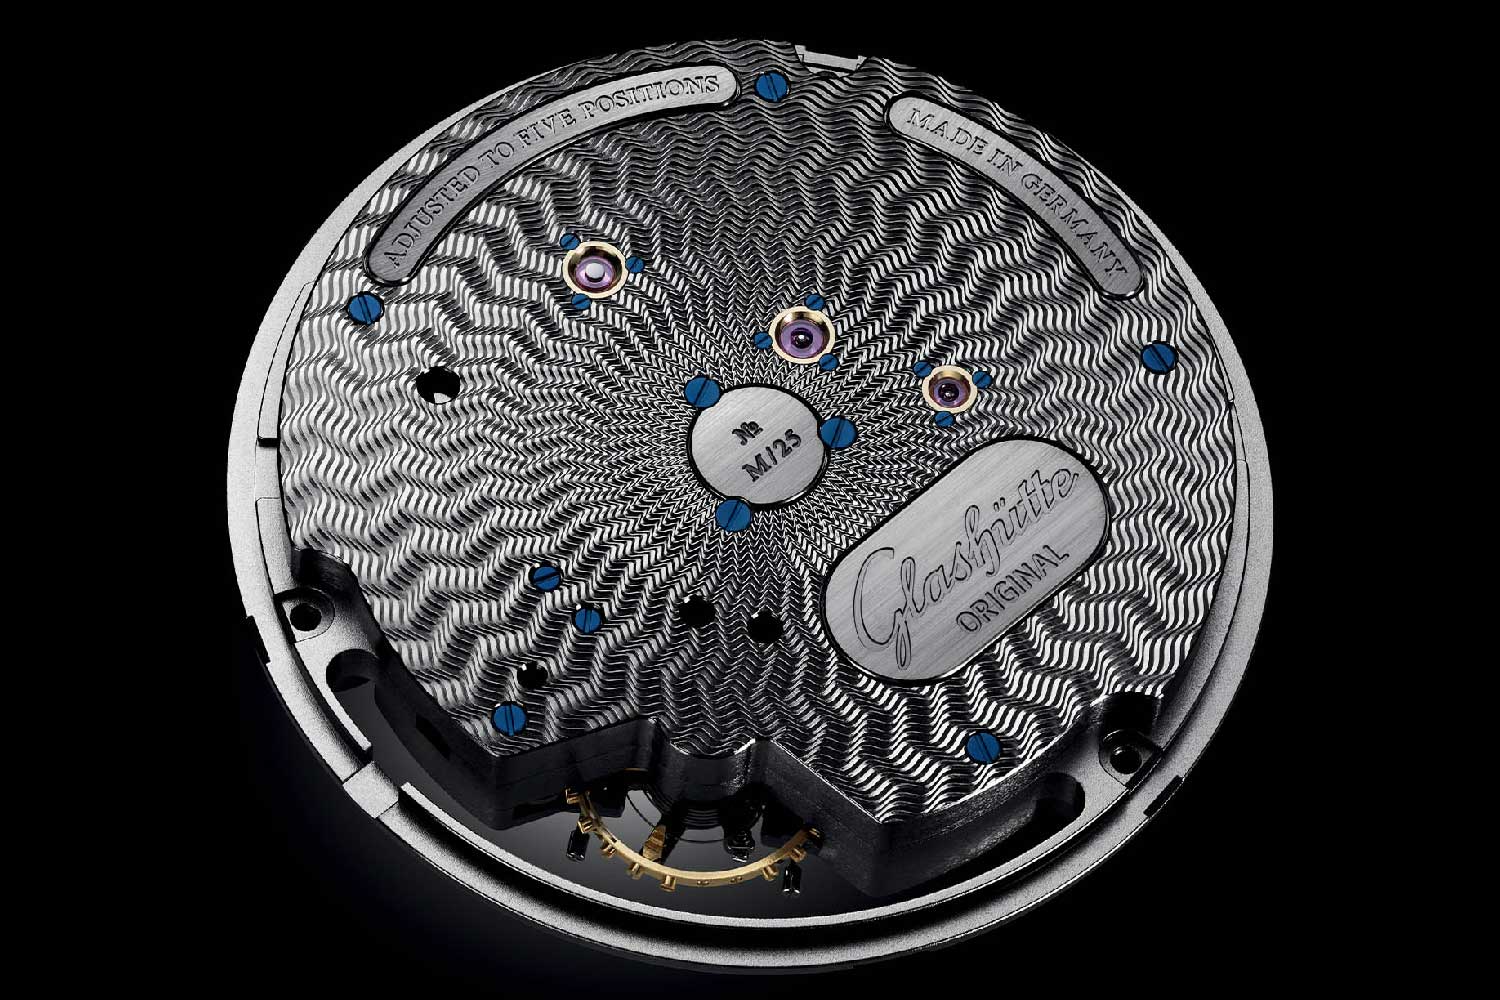 The caliber 66-09 is a hand wound movement exposing the signature three-quarter plate on front of the dial. The belle of the ball for the PanoInverse movement is the balance bridge and duplex swan-neck fine adjustment system, engineered to sit flush with the dial for a balanced aesthetic.